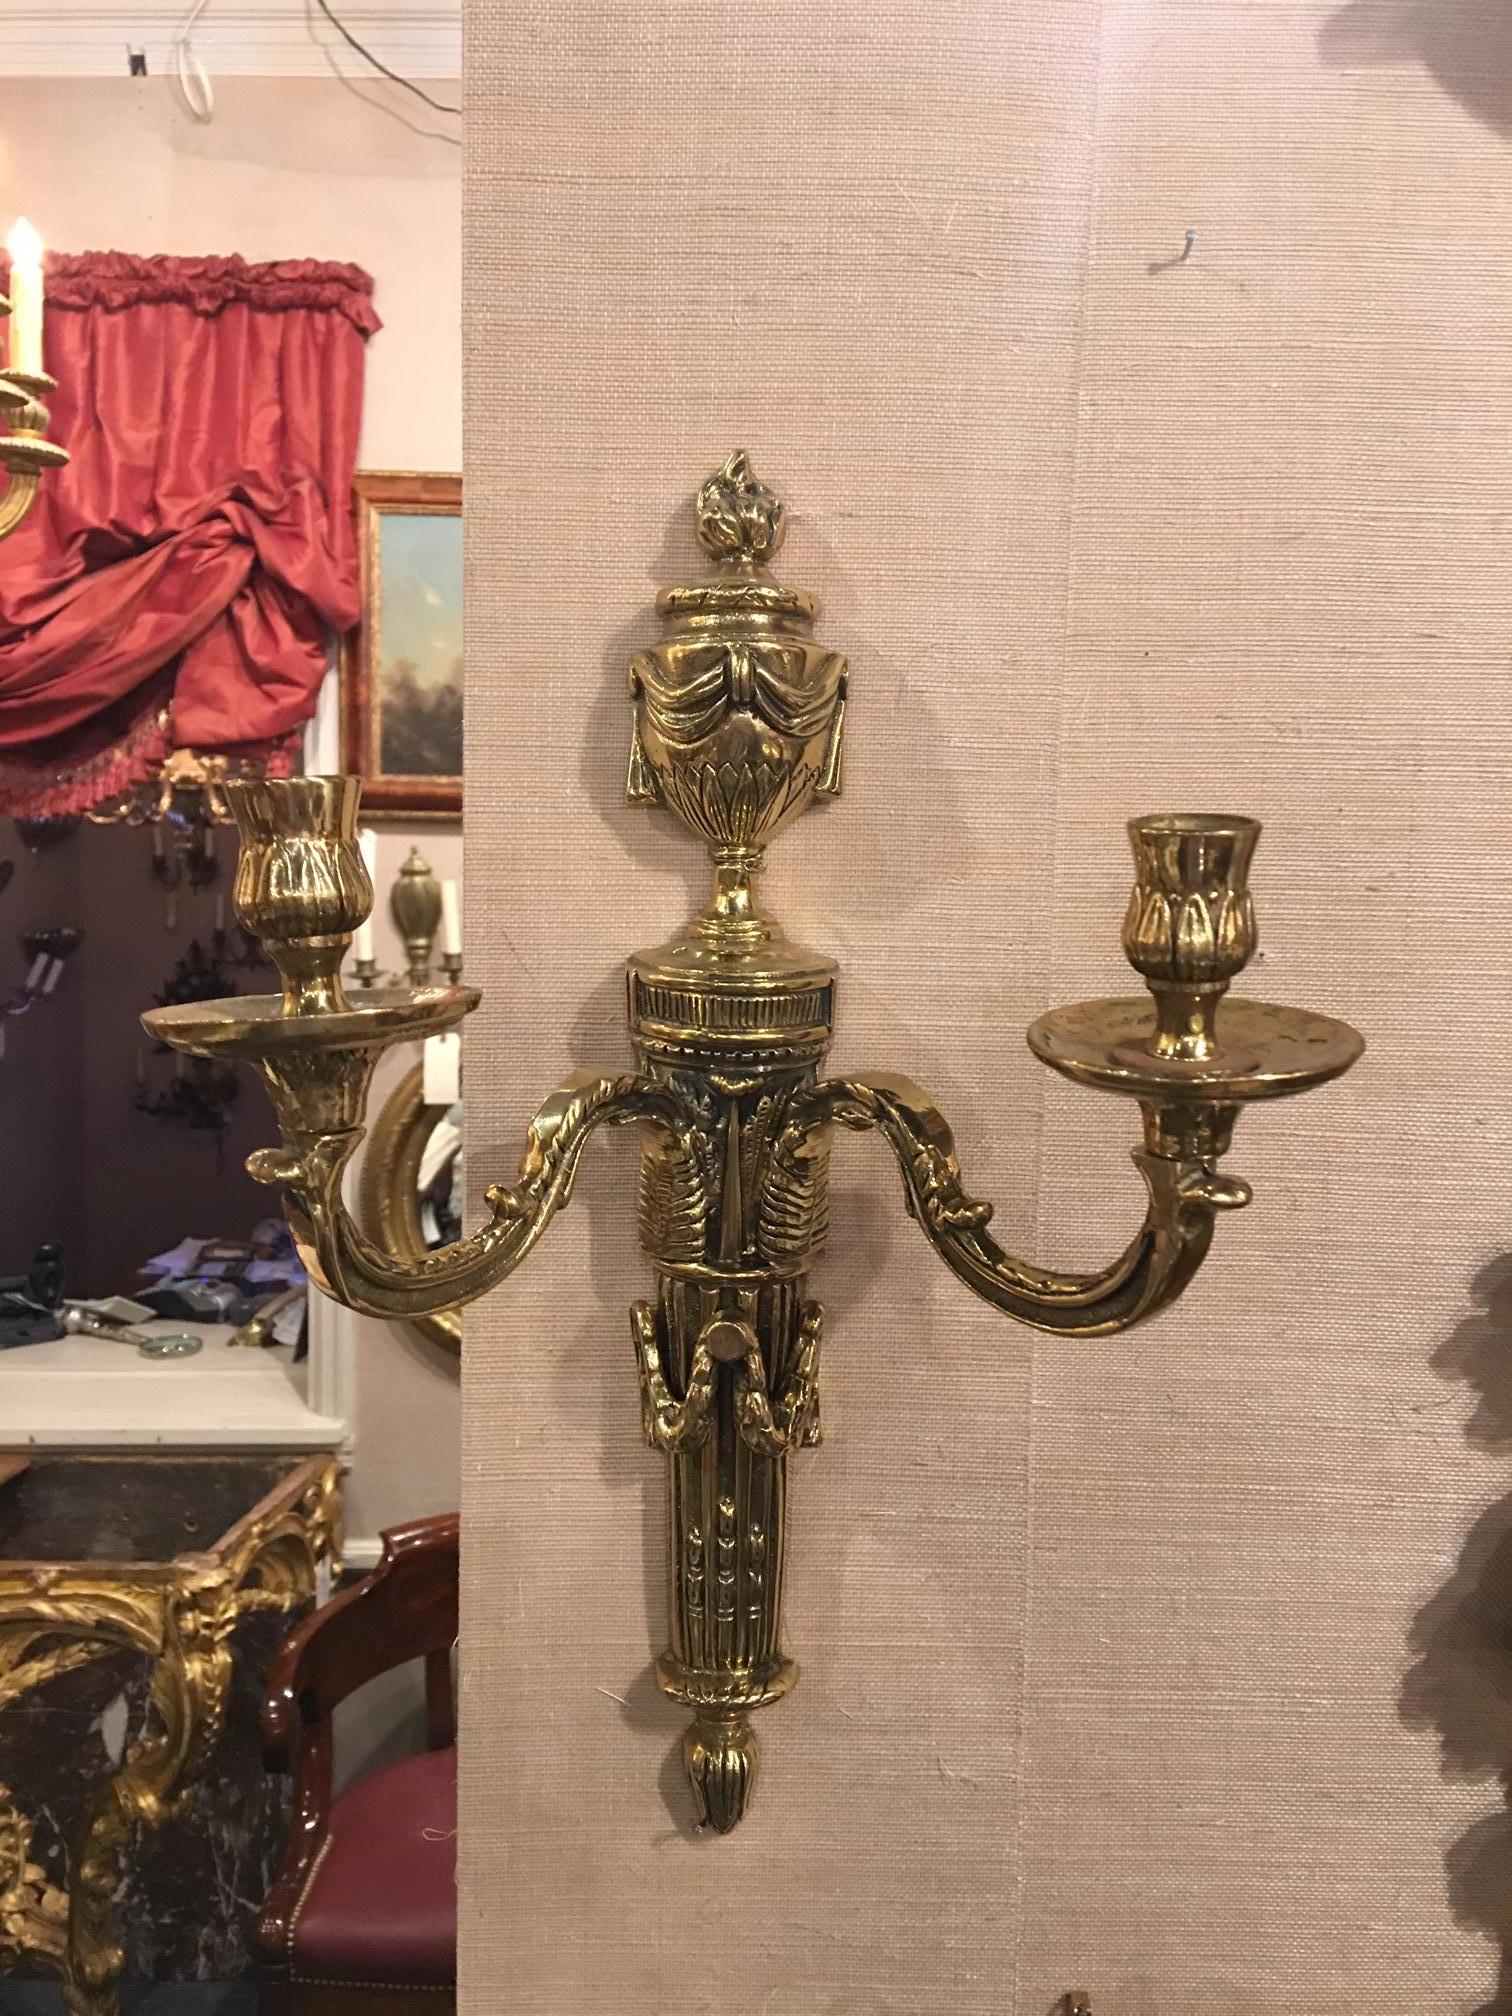 Louis XVI style cast patinated brass two-candle sconce with intricate details of flames and foliage throughout, scrolled arms lead to bobeches, 19th century. Professionally polished.